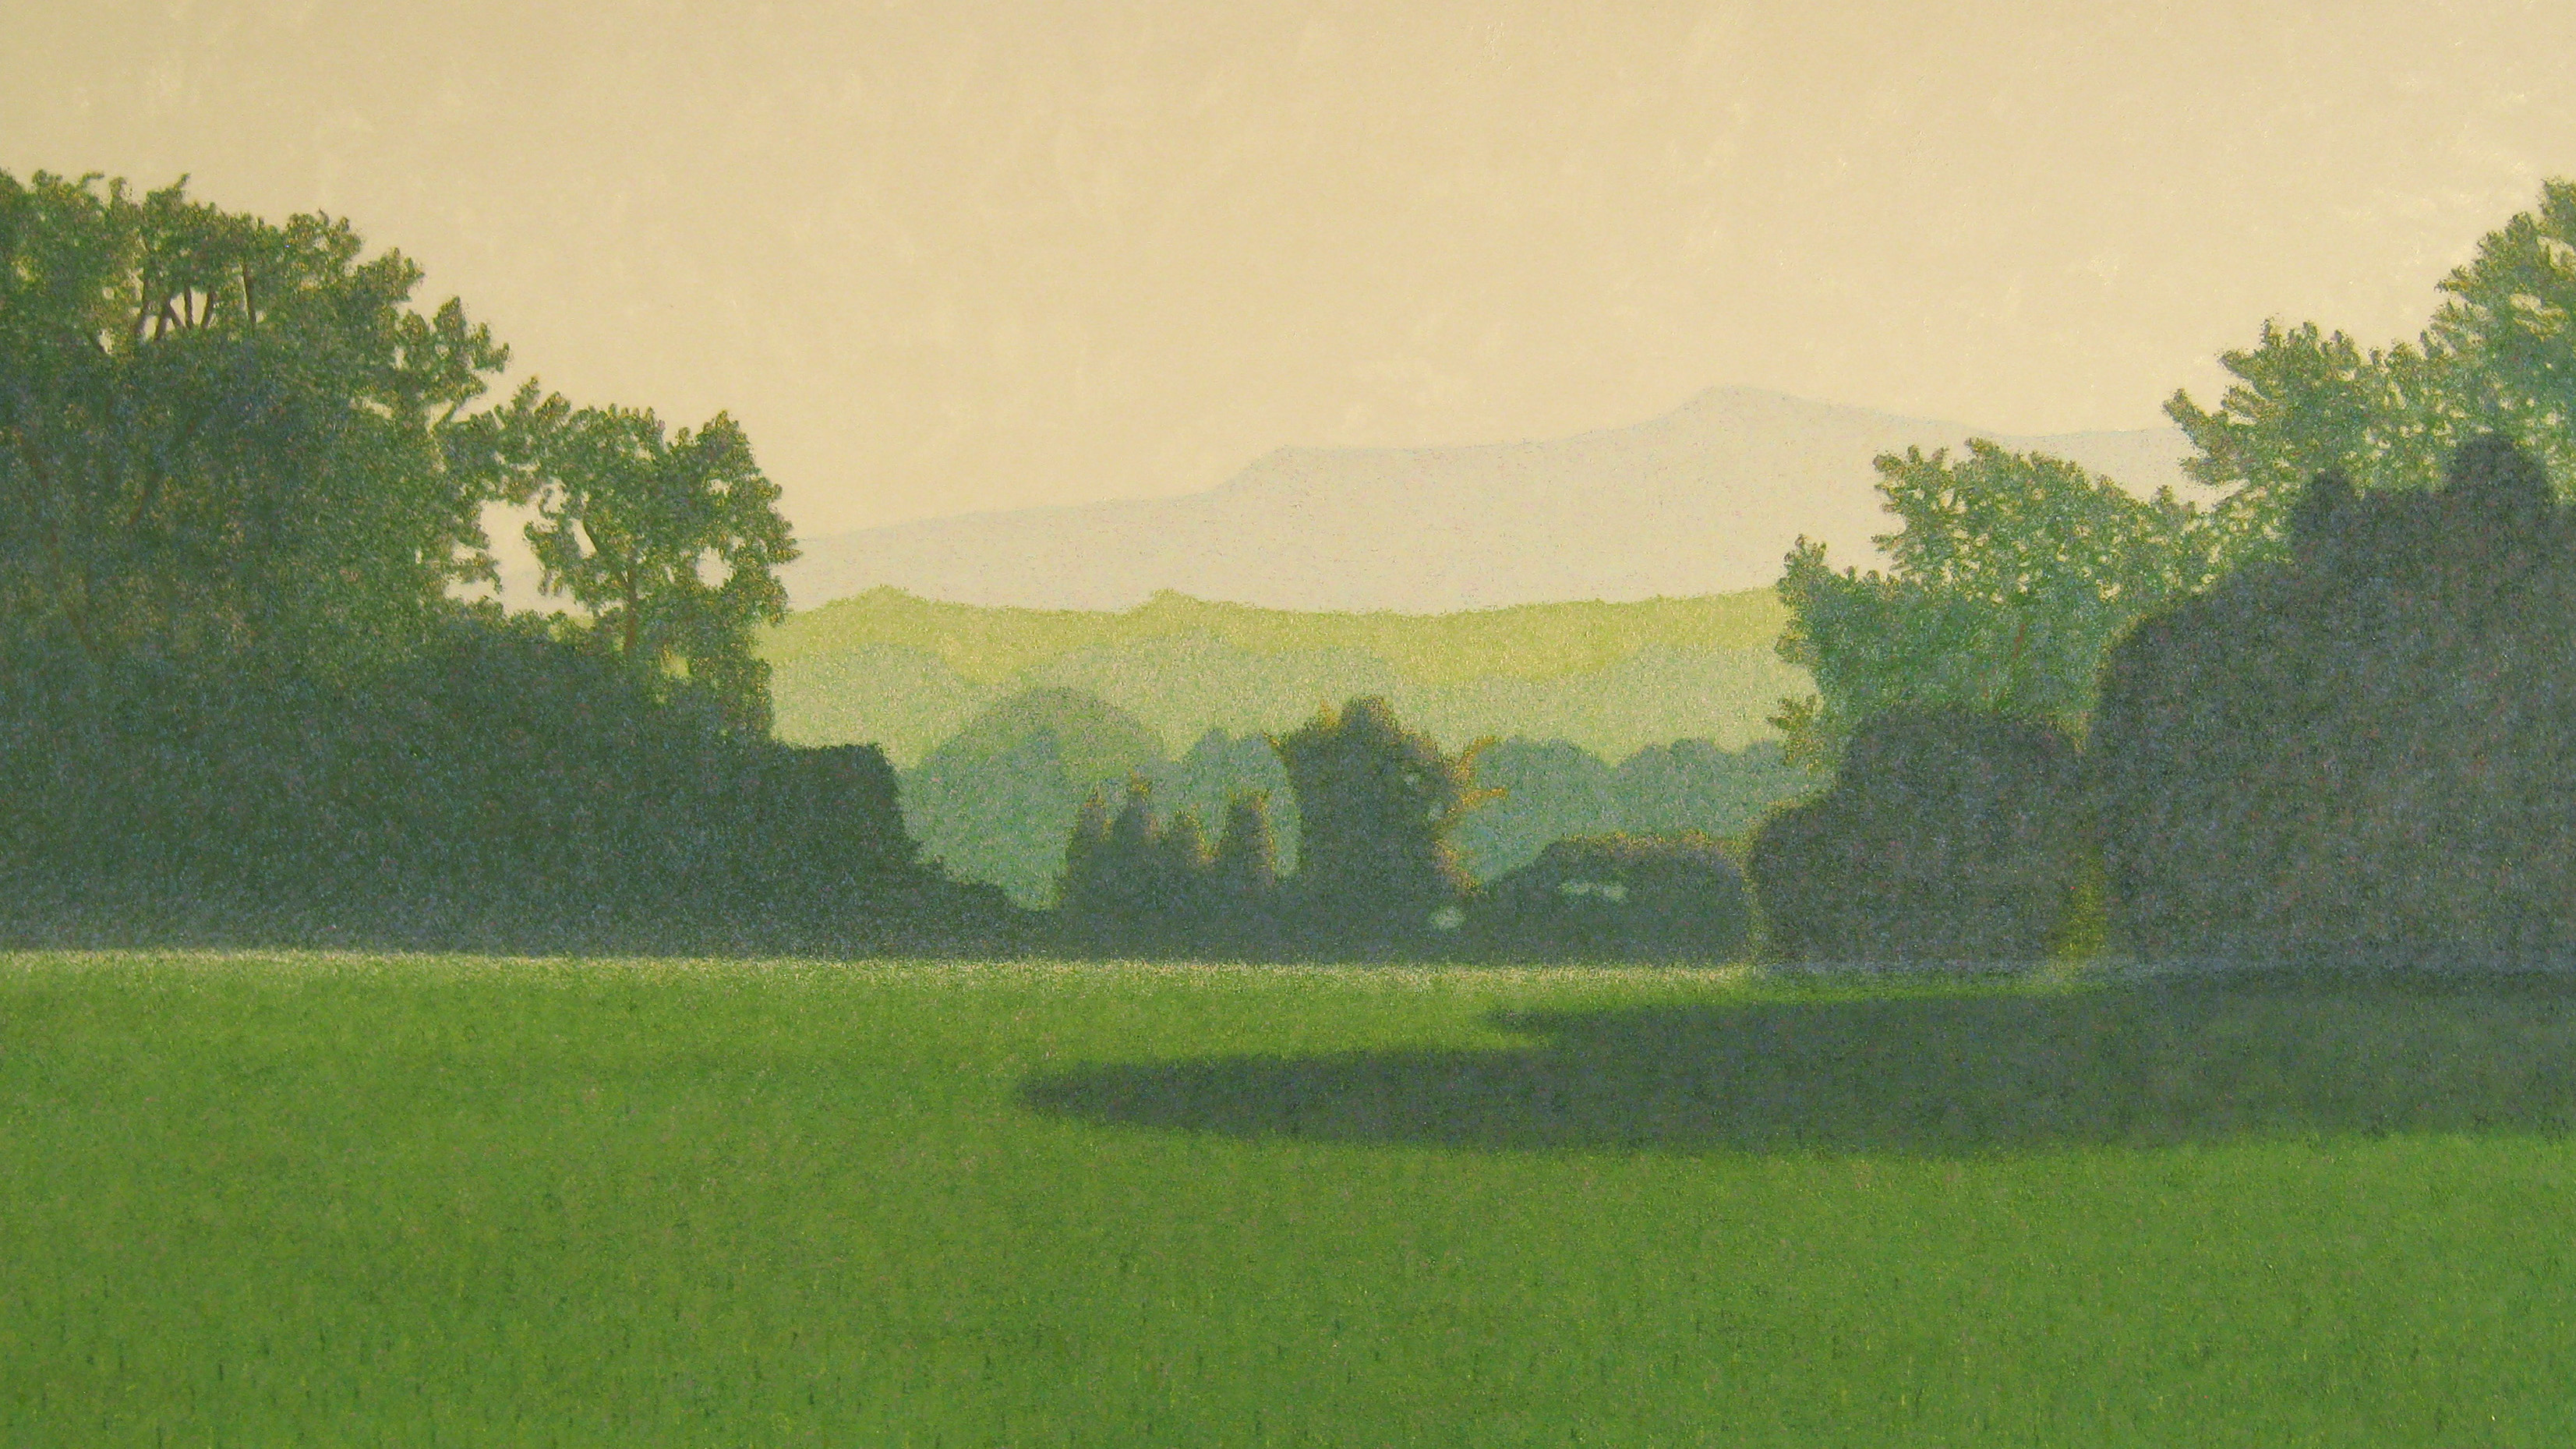 A landscape painting by Bruce Conklin, depicting a green field bordered by trees, with a pale yellow sky.